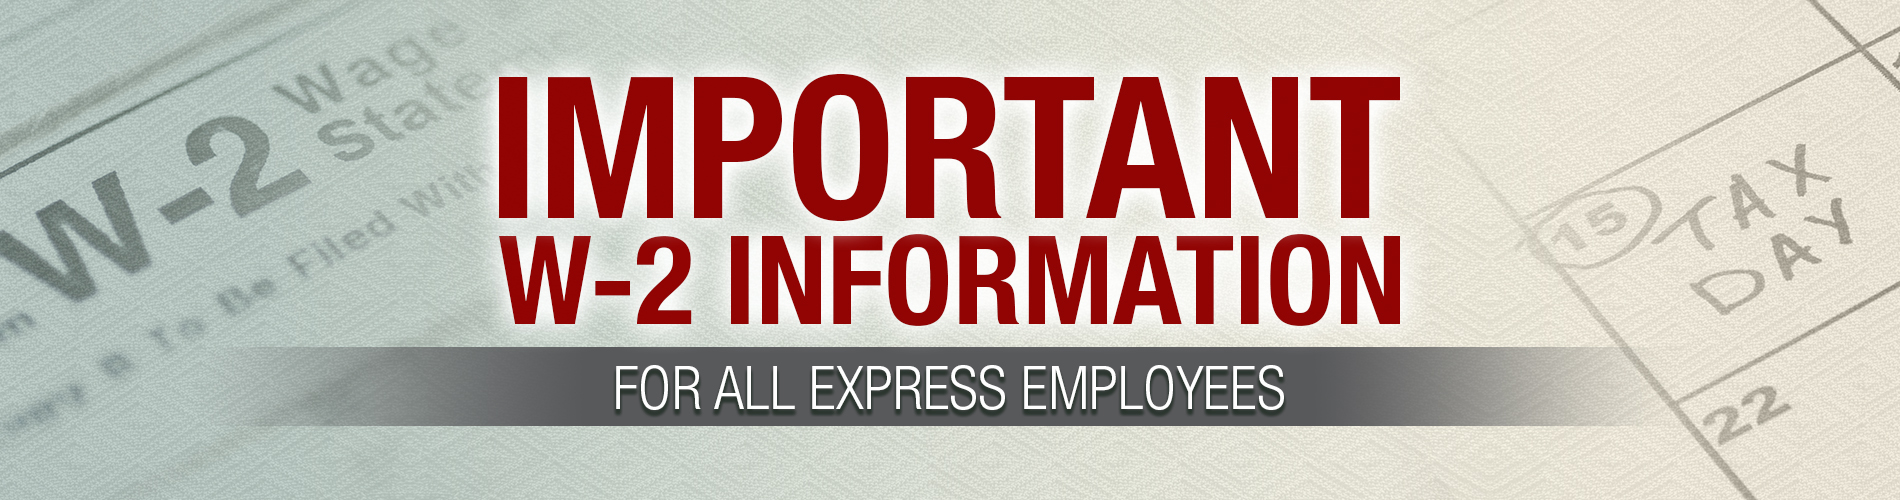 Attention All Employees - Important W-2 Information